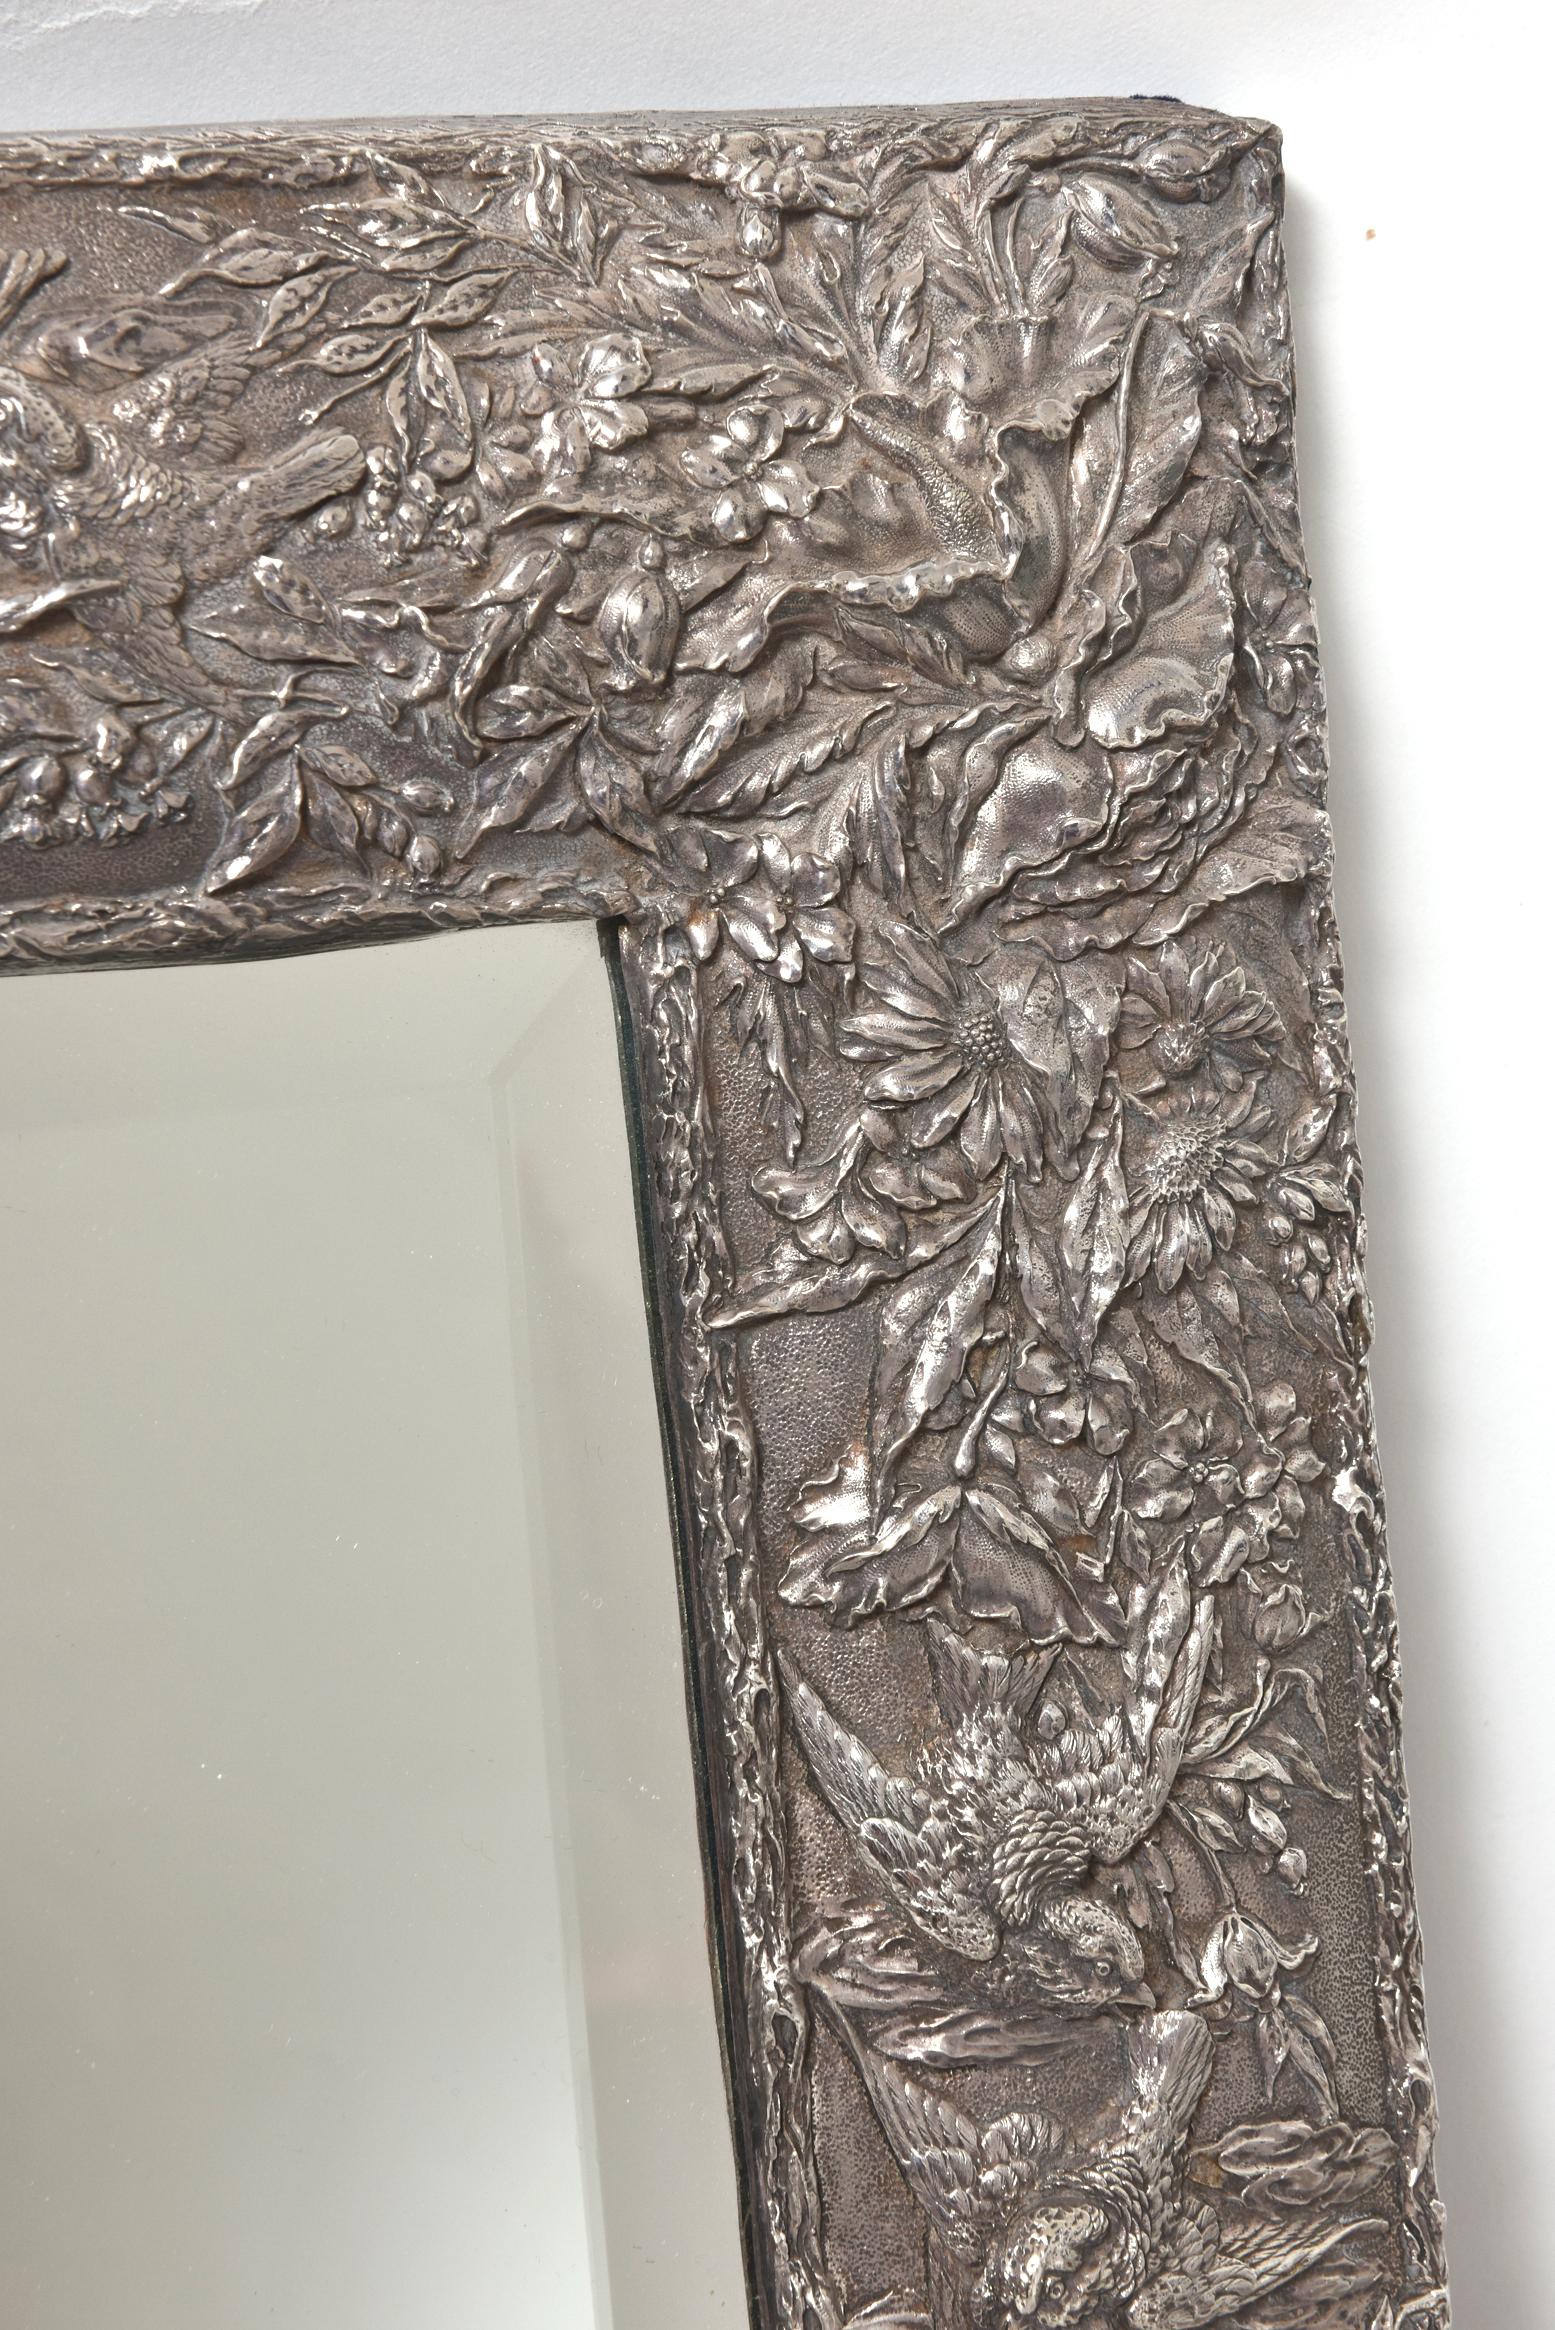 20th century, large sterling silver repoussé frame decorated in the Aesthetic style with birds flying amidst flowers. Inside the frame is a beveled glass mirror. The backside of the rectangular frame is blue velvet with an easel back. 

 Marked